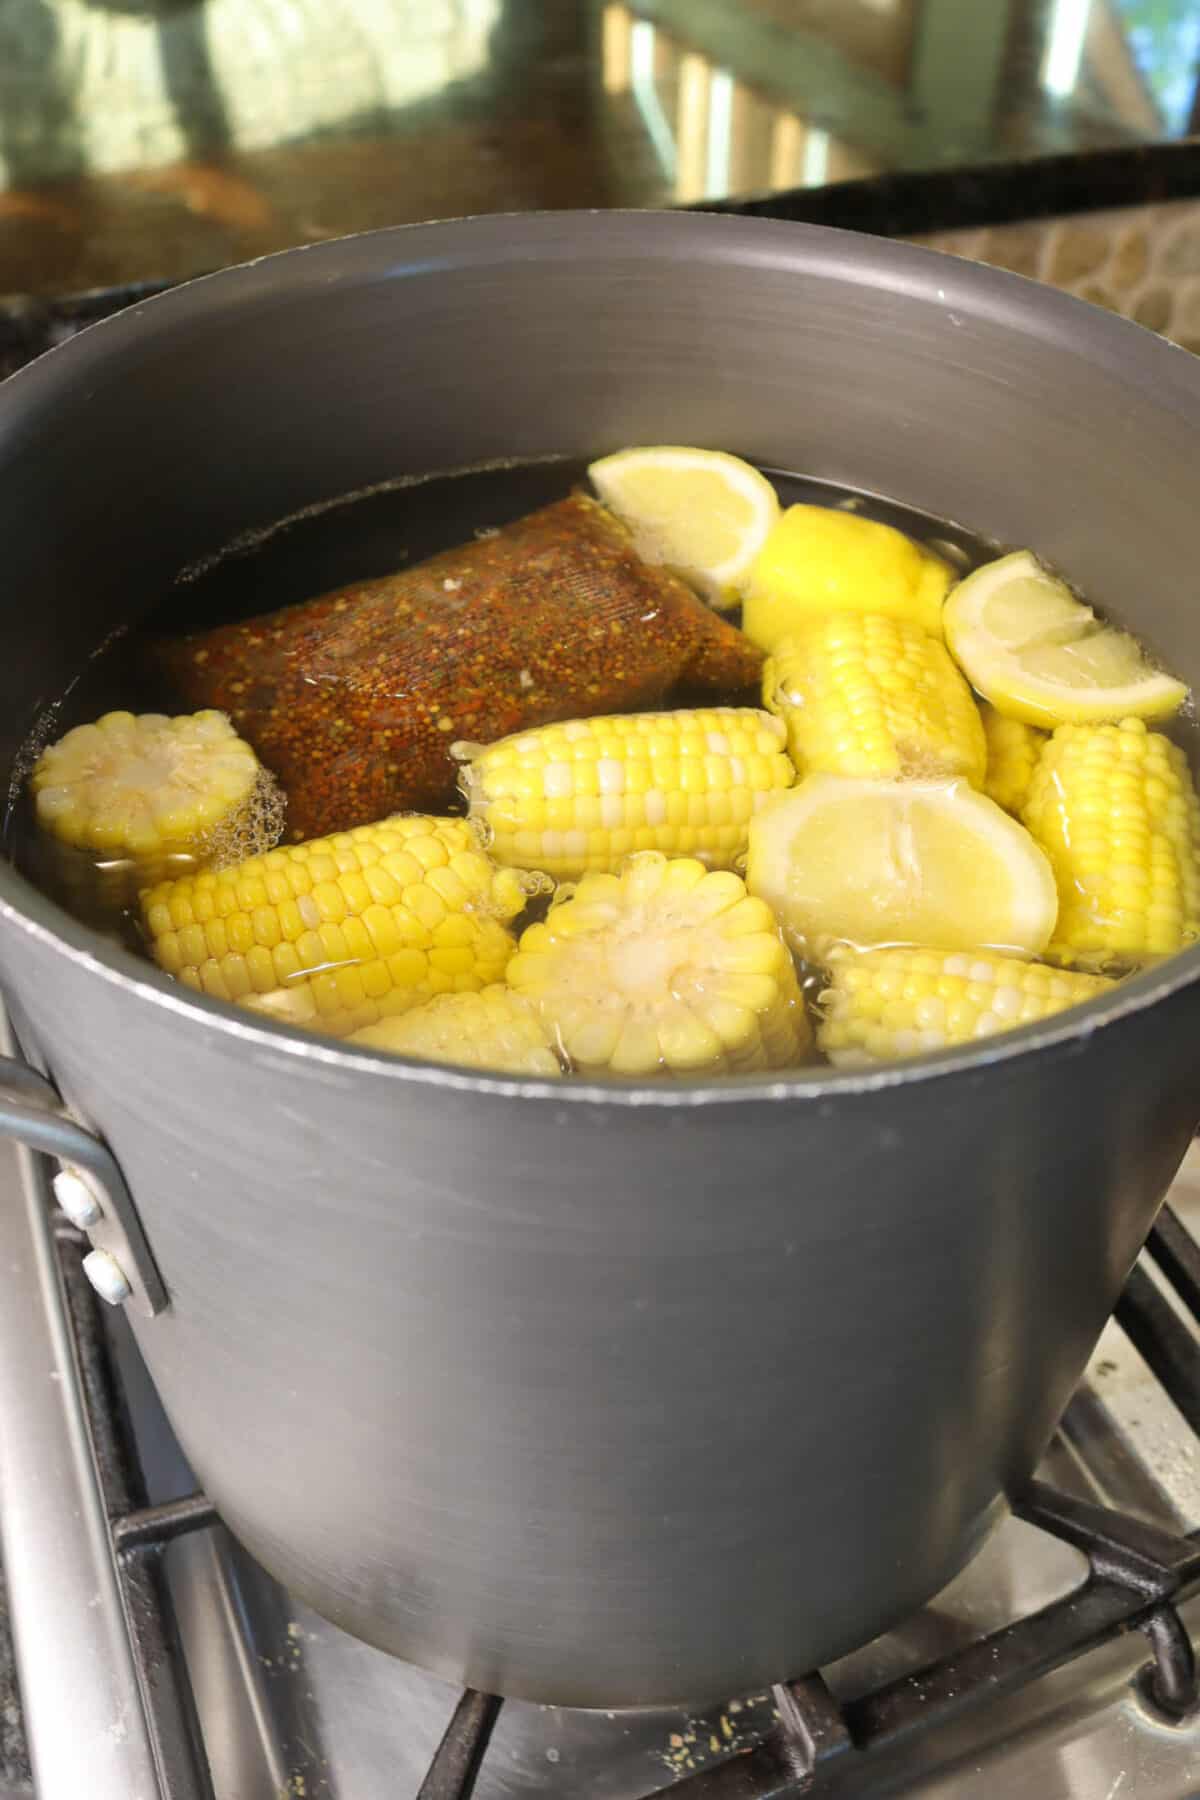 corn, lemons, and a spice packet n a large pot of water